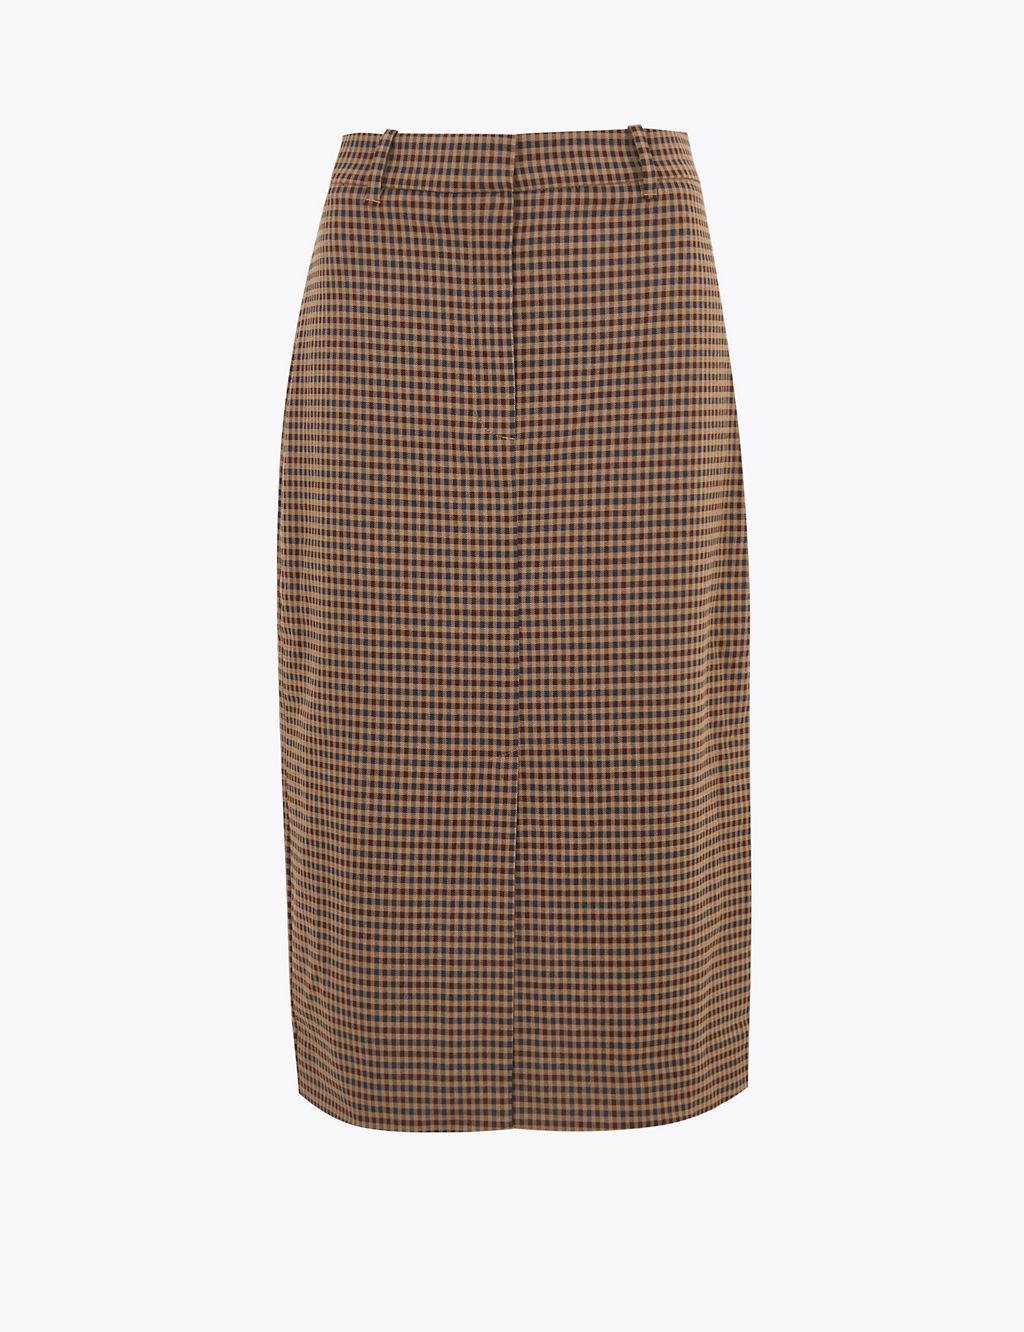 Checked Knee Length Pencil Skirt | M&S Collection | M&S